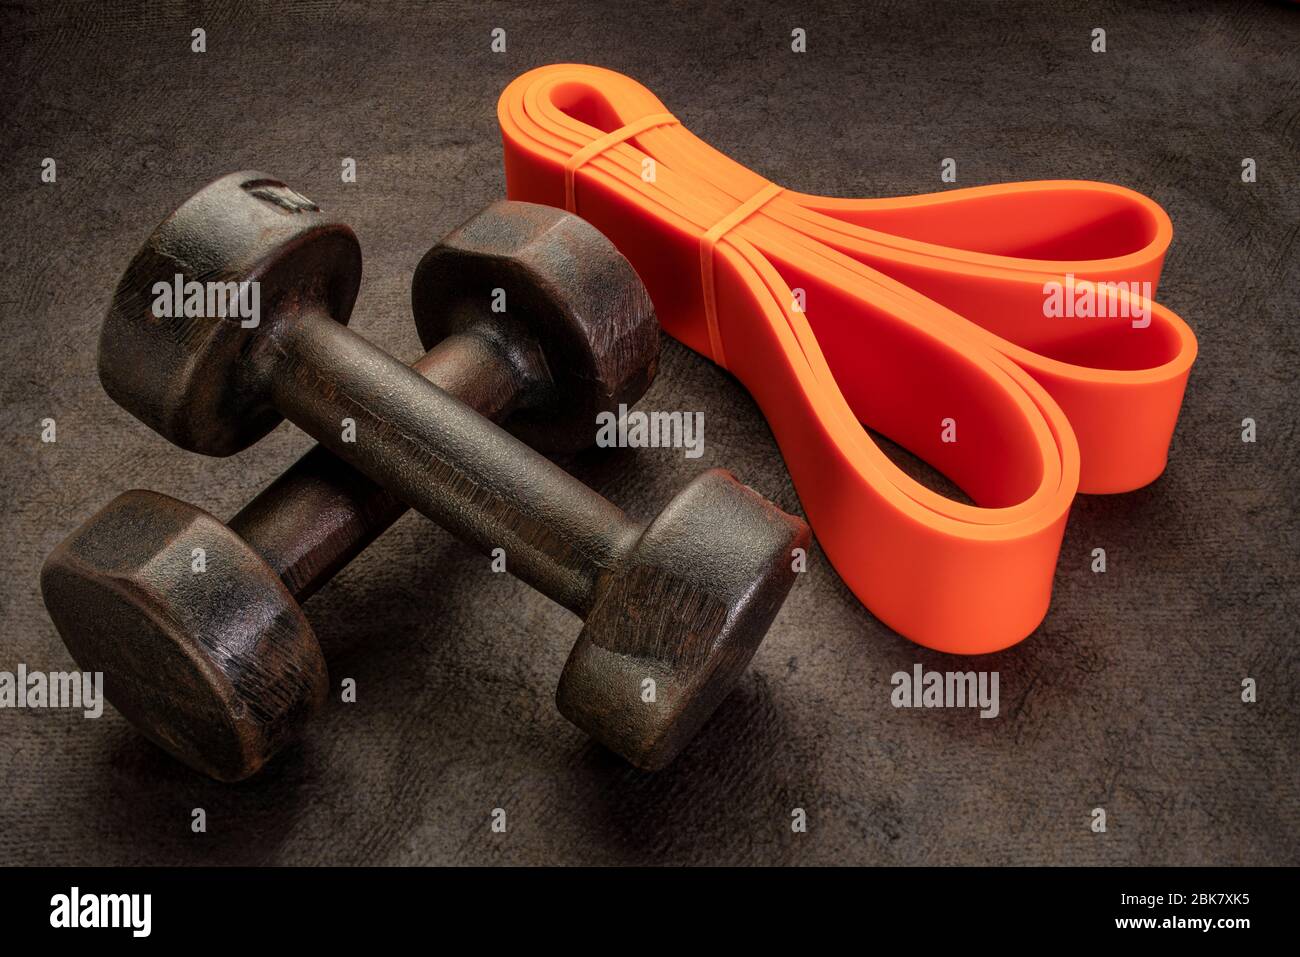 old rusty dumbbells and resistance bands on textured handmade bark paper, execise and fitness concept Stock Photo